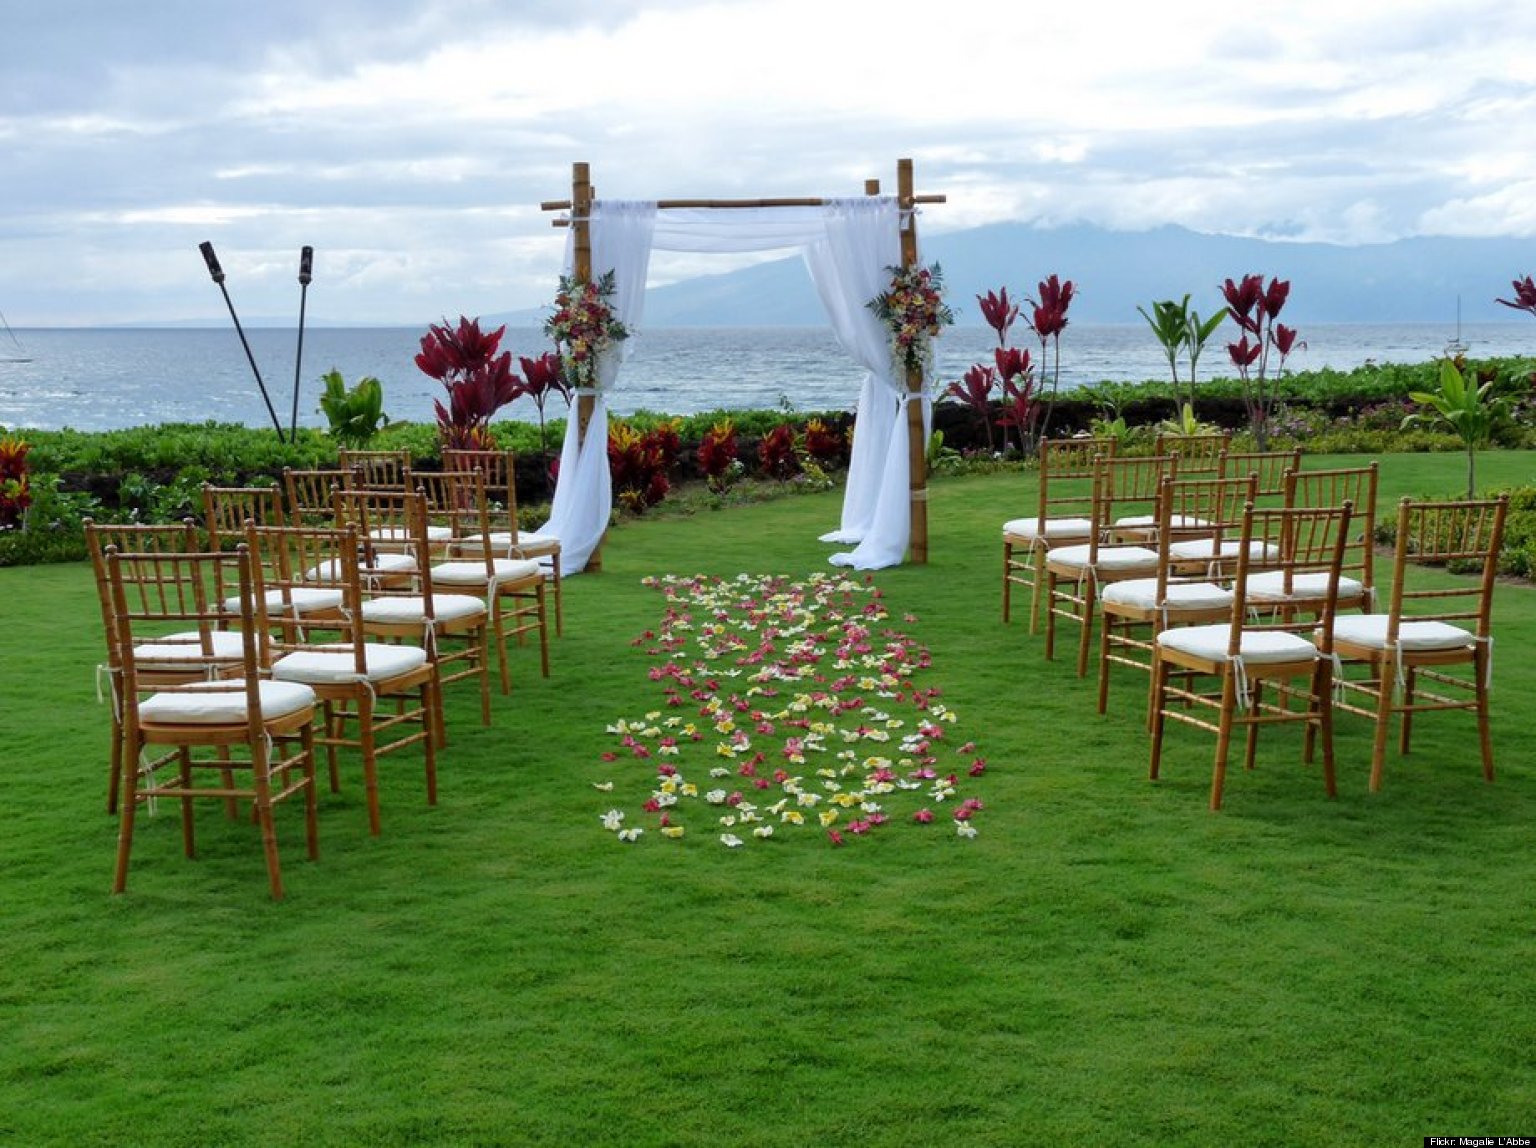 Destination Weddings: 10 Relaxing Resorts For A Stress-Free Celebration